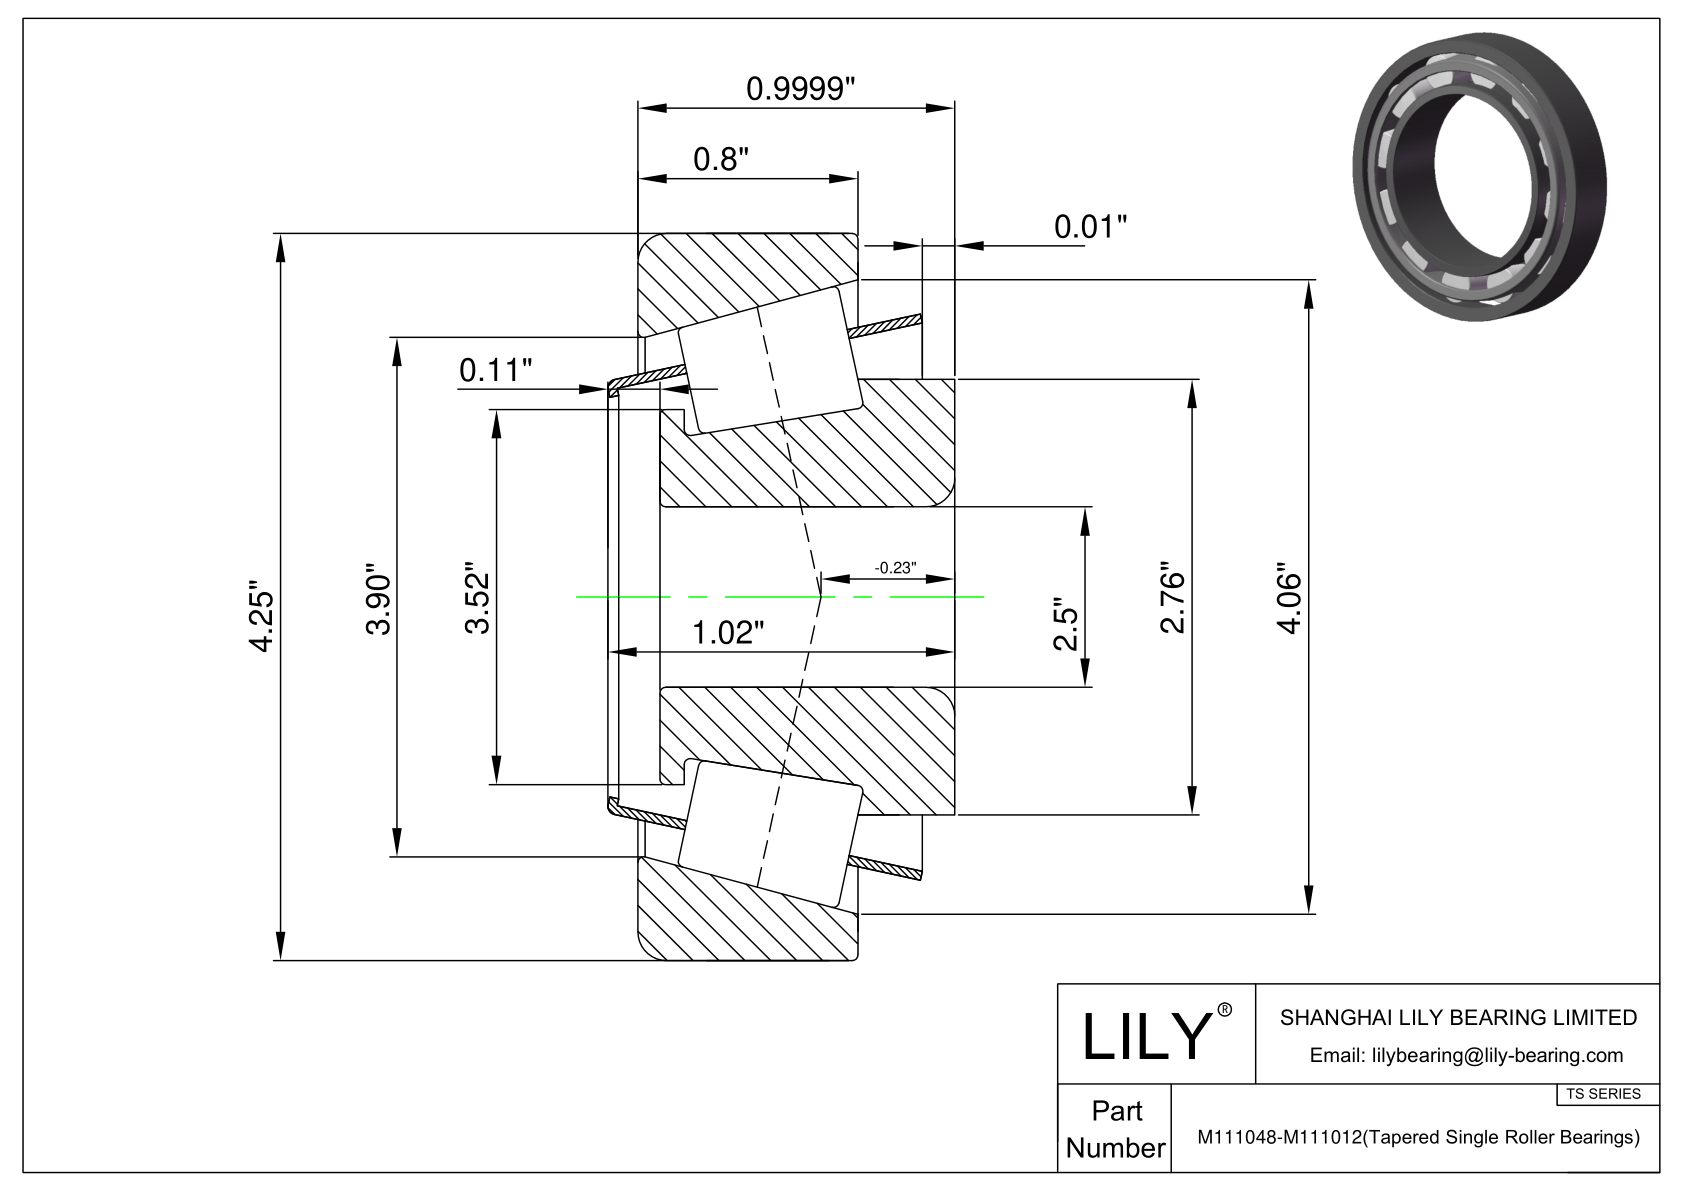 M111048-M111012 TS (Tapered Single Roller Bearings) (Imperial) cad drawing